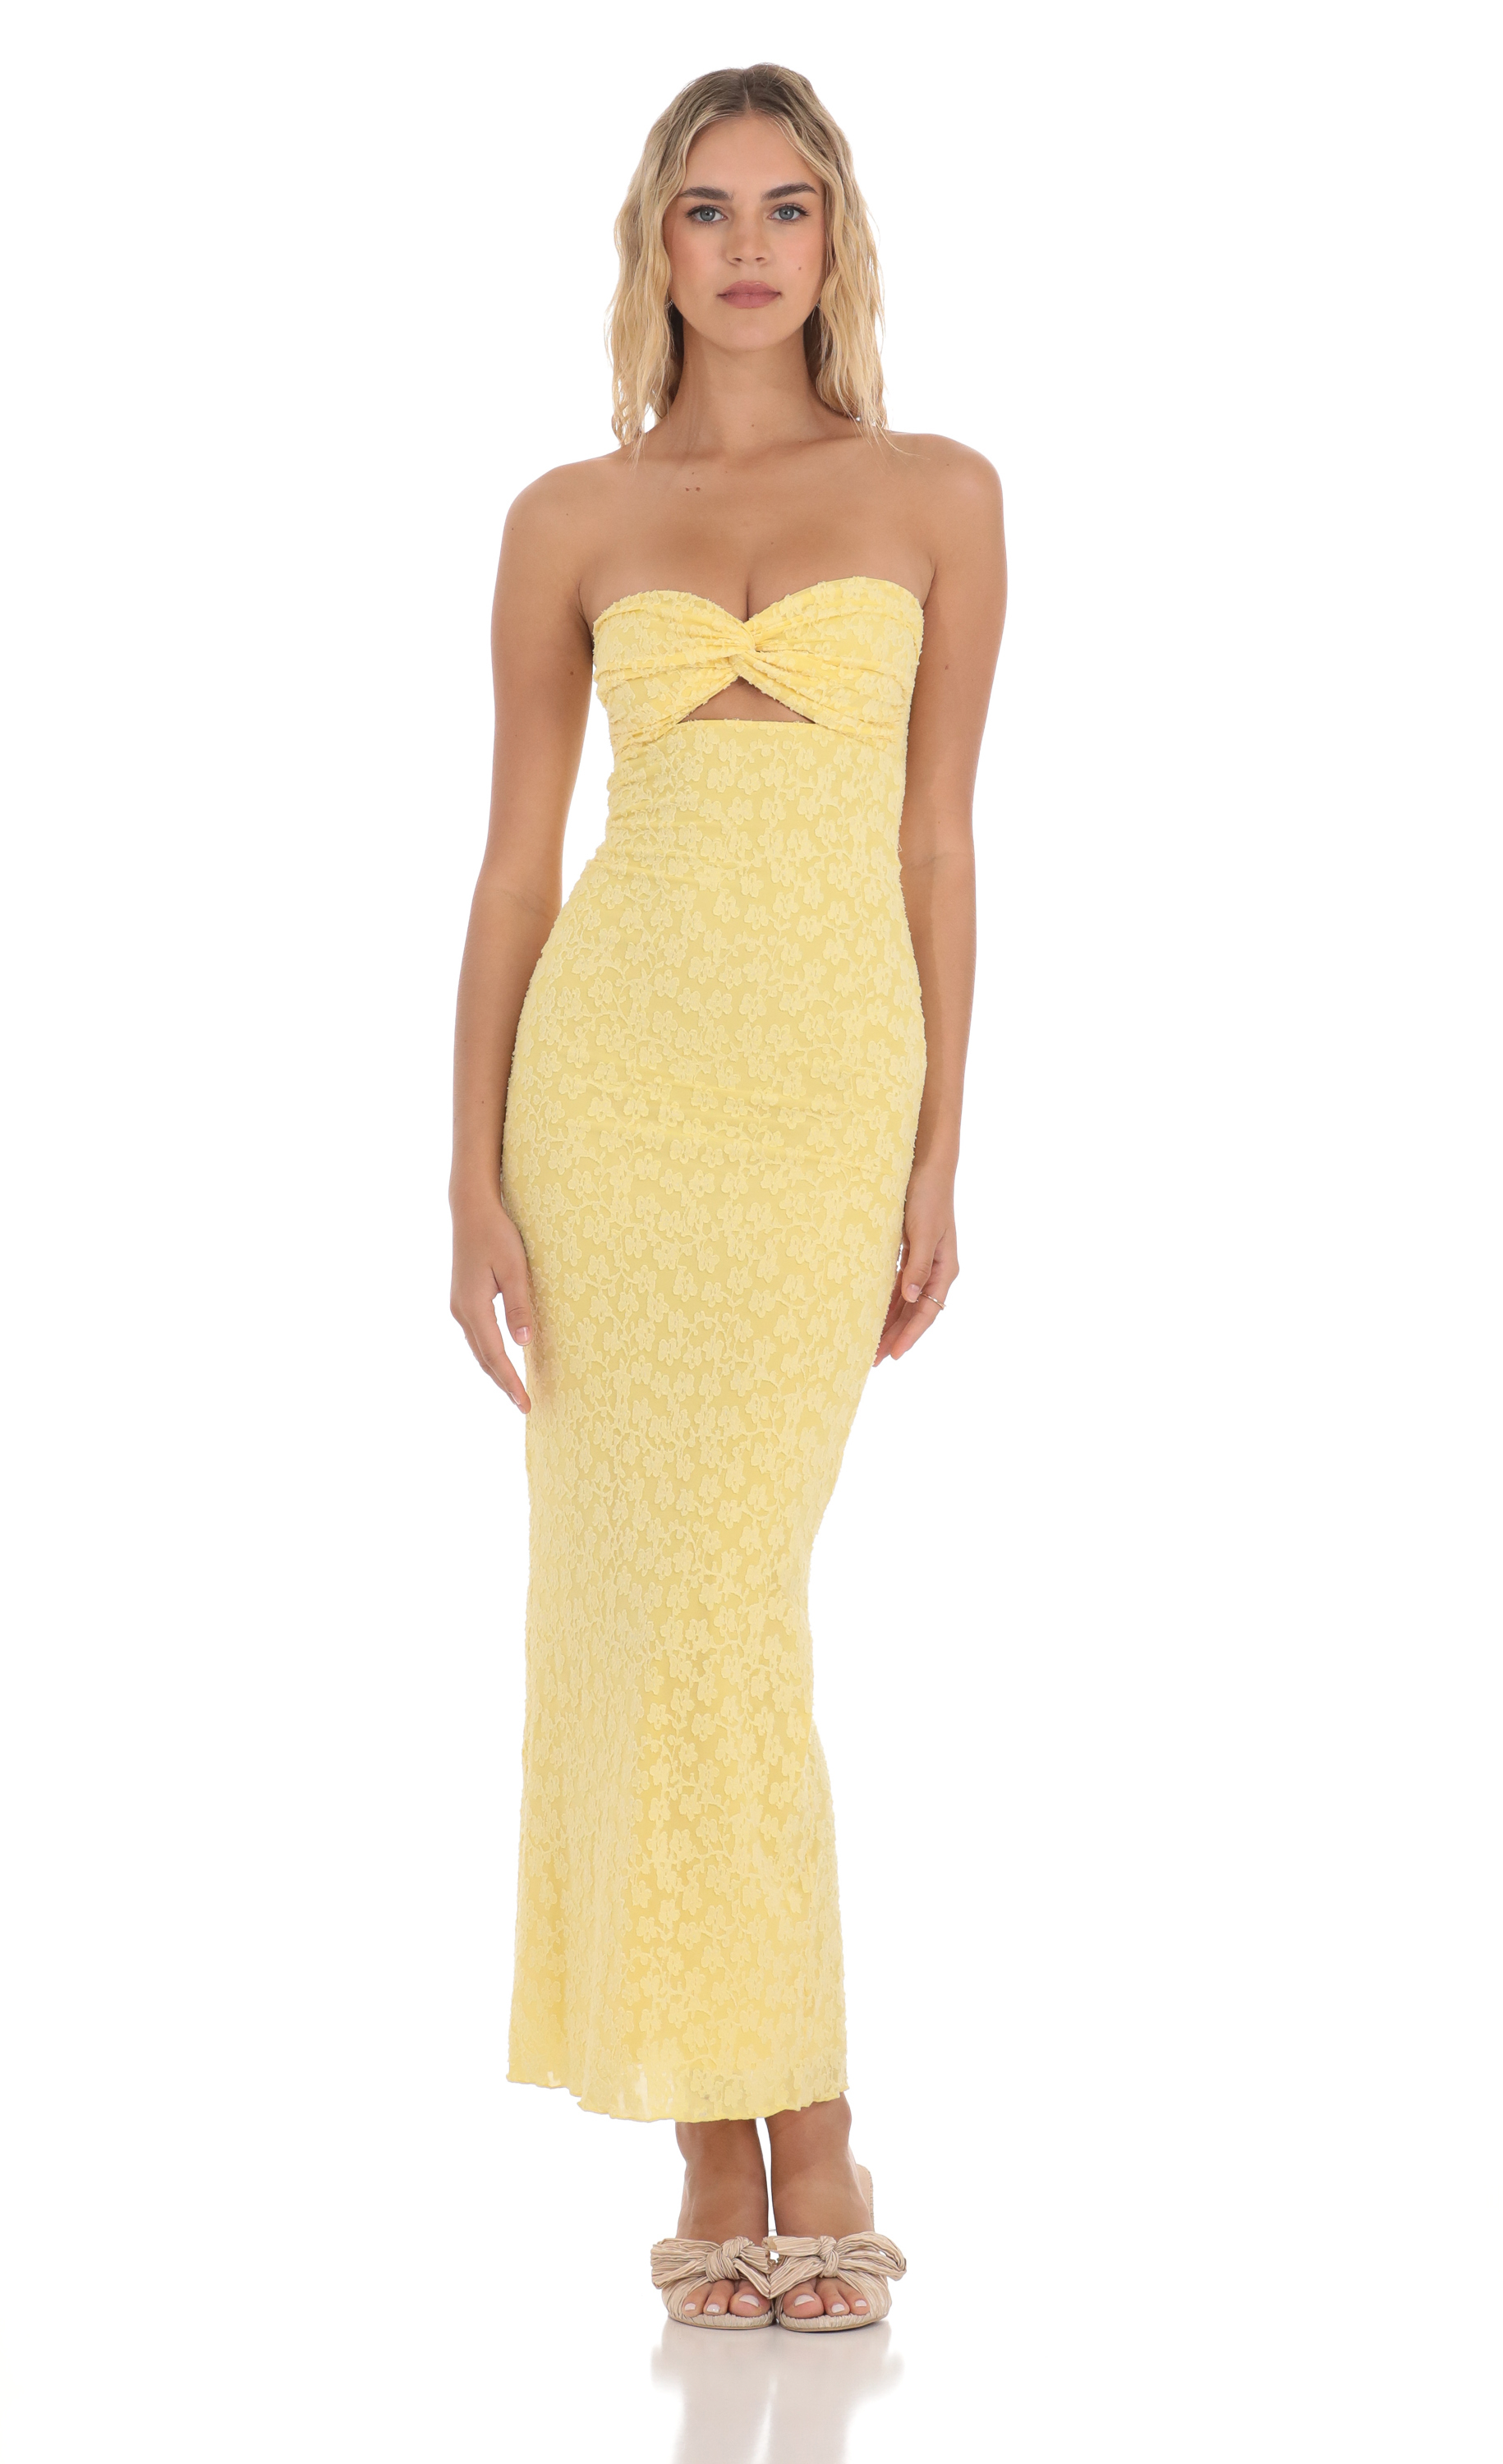 Strapless Textured Floral Twist Maxi Dress in Yellow